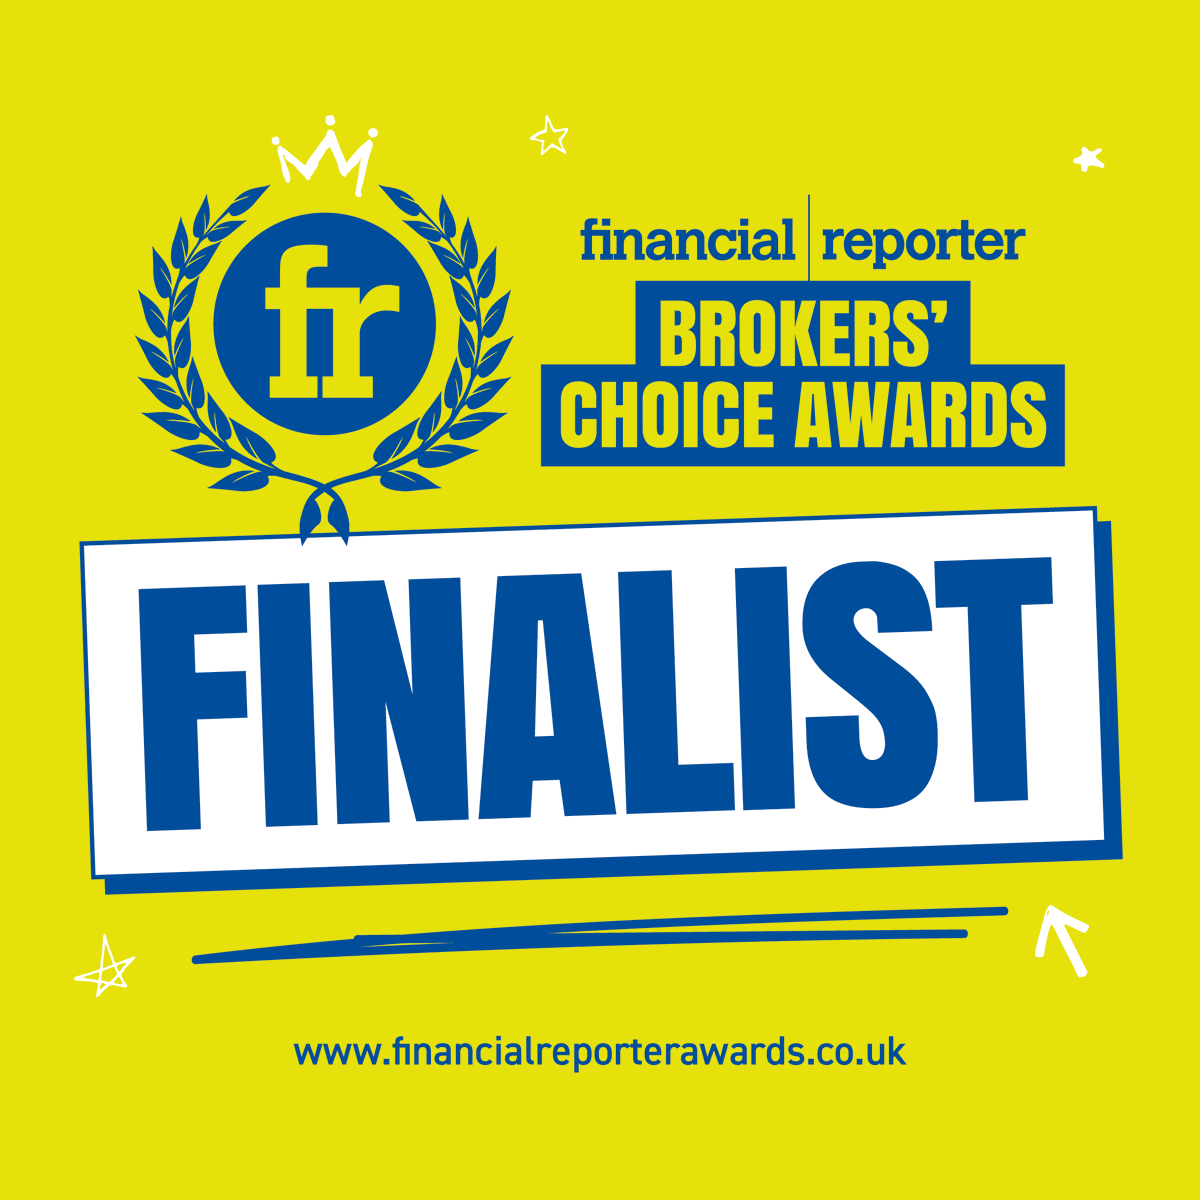 We’re delighted to be going into the Bank Holiday weekend with some more great #awards news! This time, we’ve been shortlisted for the Best Buy-to-Let Lender at this year’s @F_Reporter Broker’s Choice Awards! #MortgageBrokers #MortgageIntermediaries #FRA24 #BackingYou